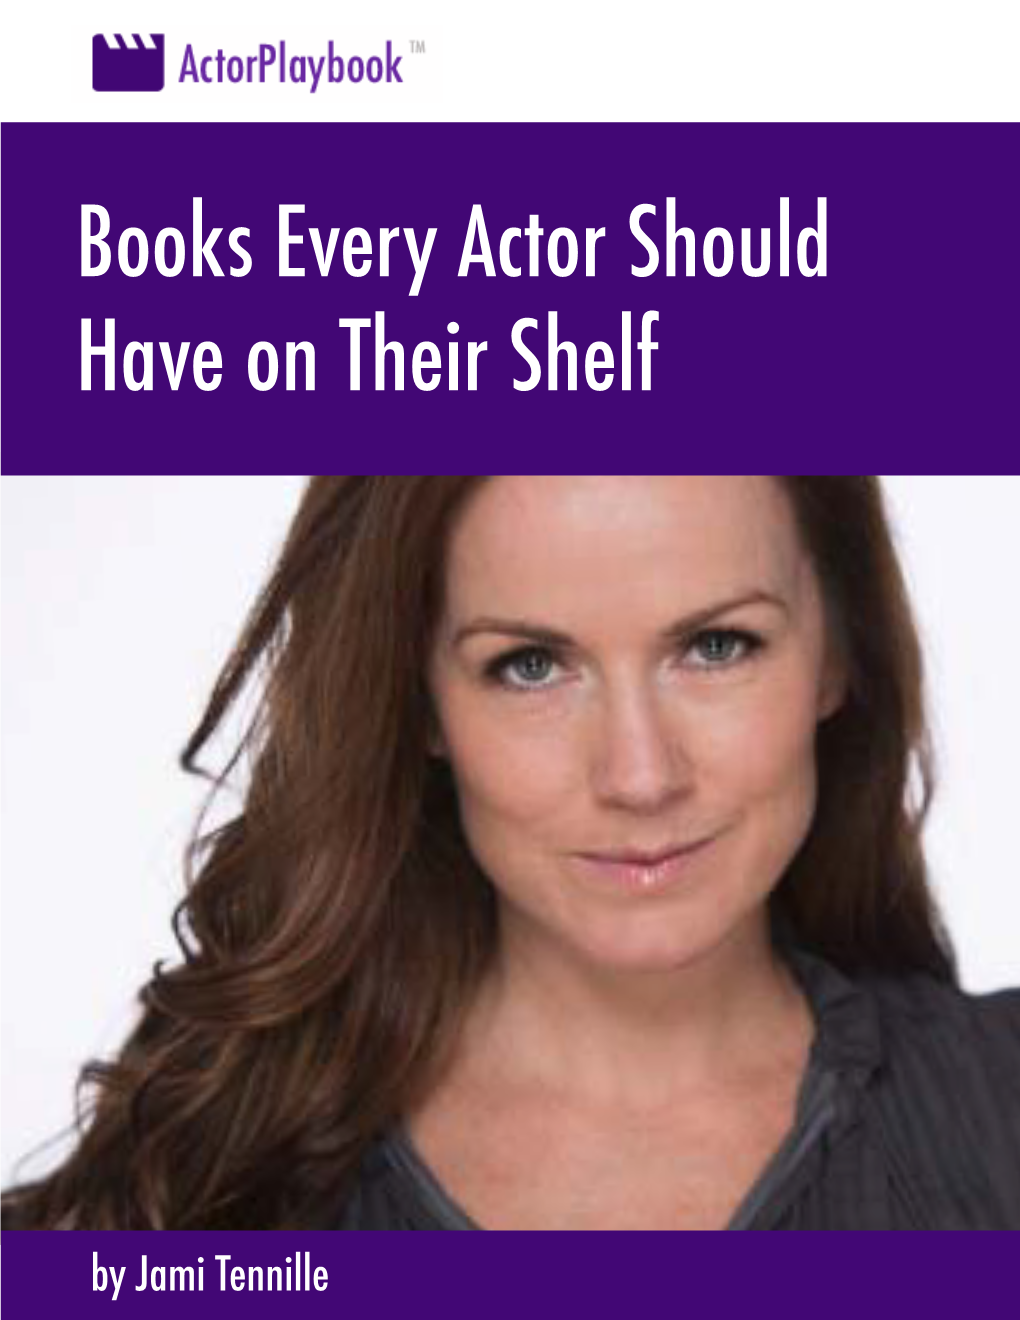 Books Every Actor Should Have on Their Shelf